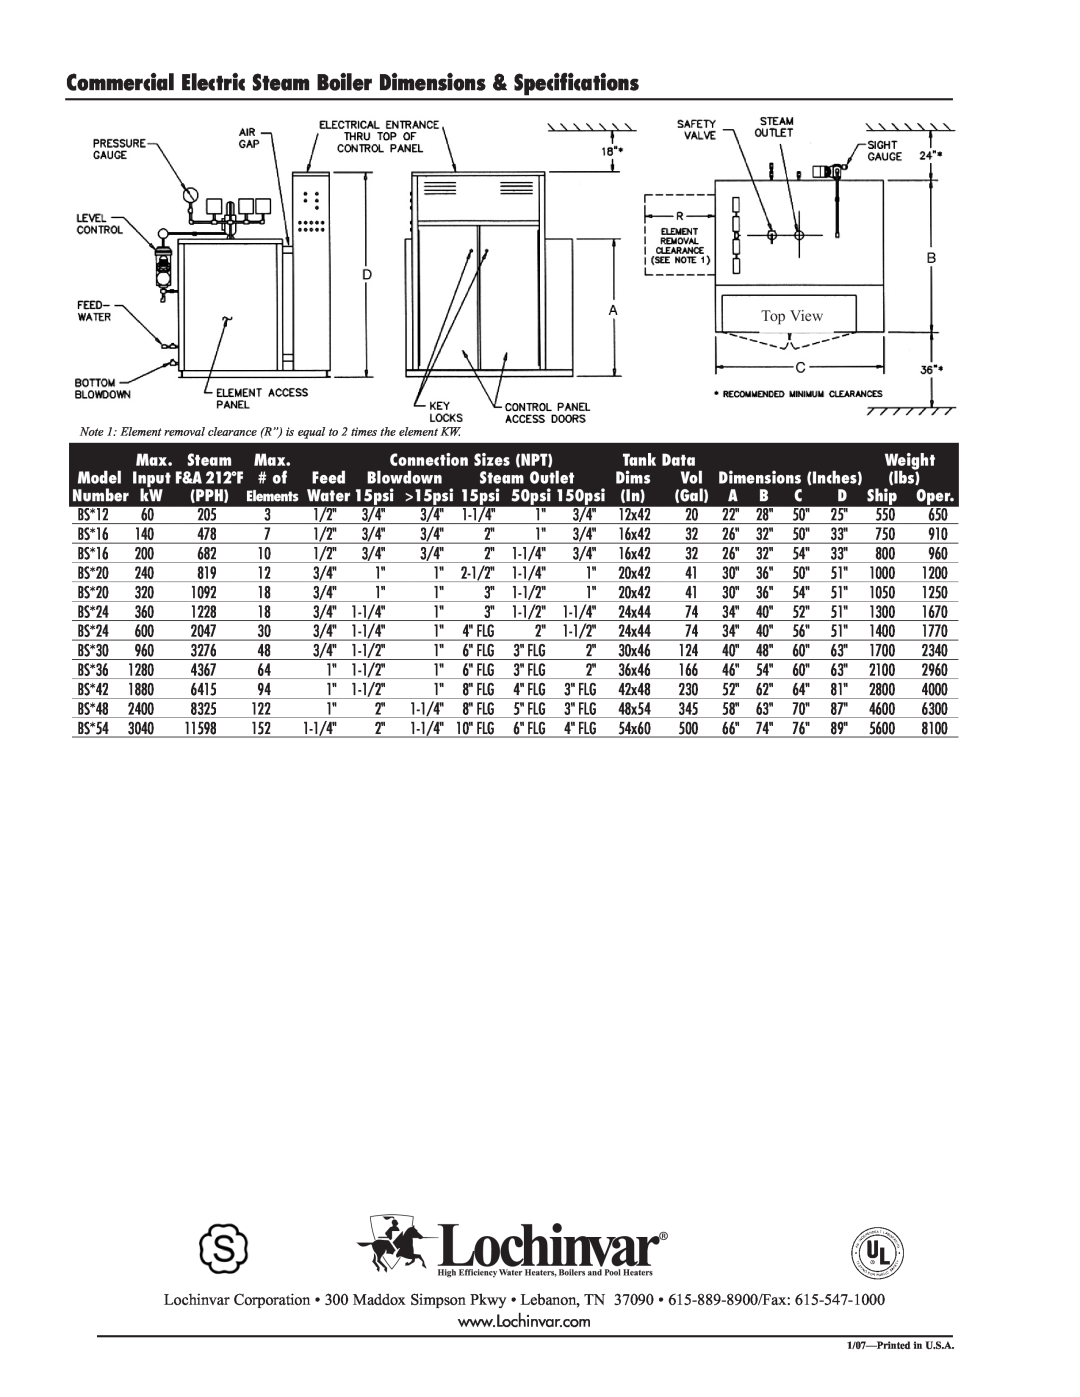 Lochinvar EBS-SUB-02 warranty Commercial Electric Steam Boiler Dimensions & Specifications, Top View 